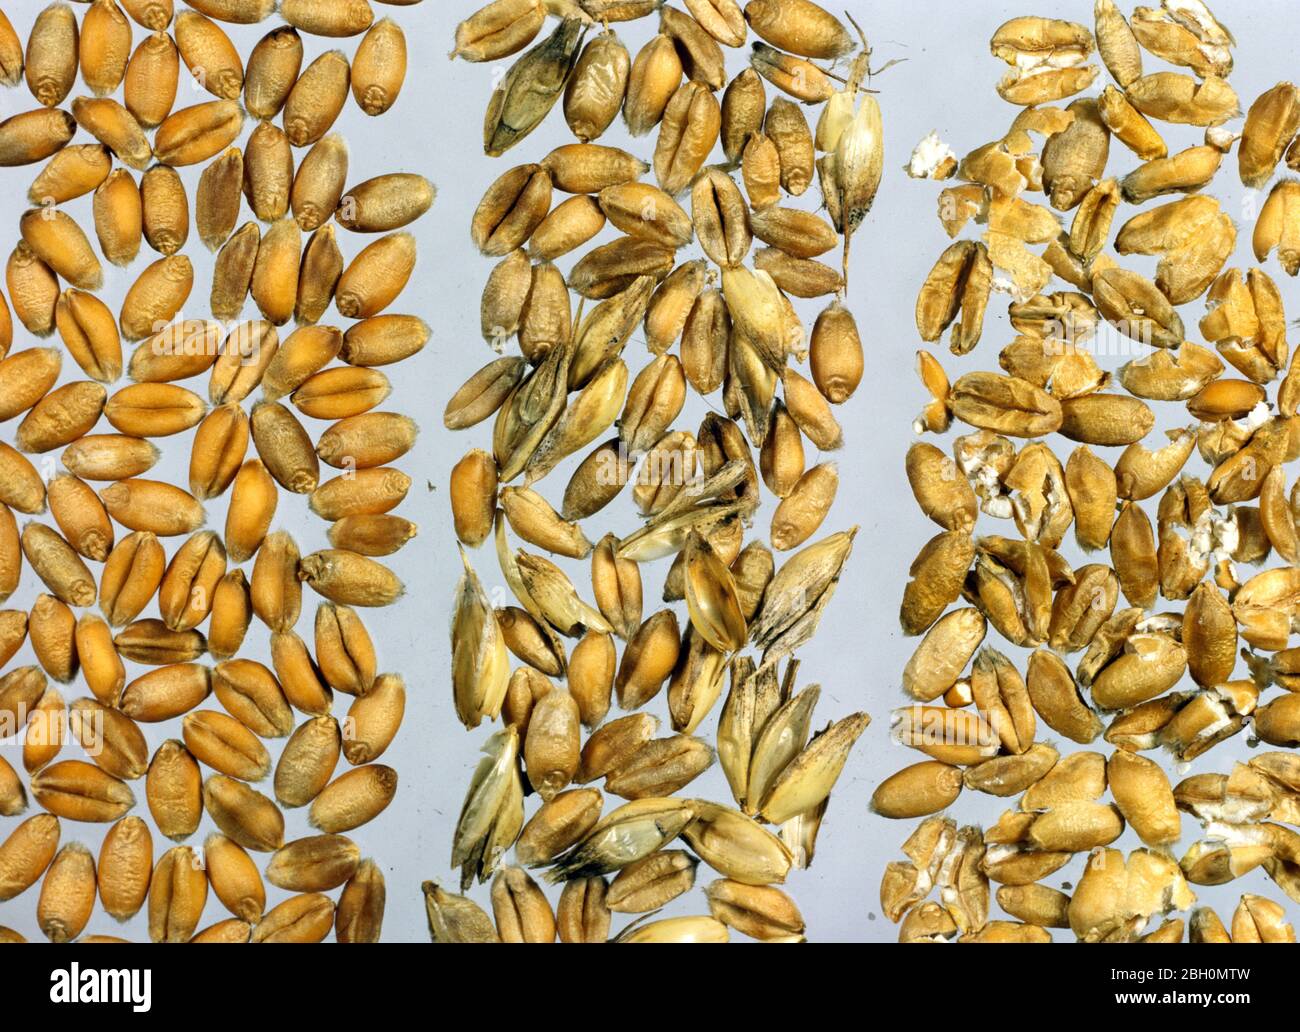 Grain quality - good harvested wheat grain compared with chaff and husk contamination and one with broken or crushed seeds Stock Photo